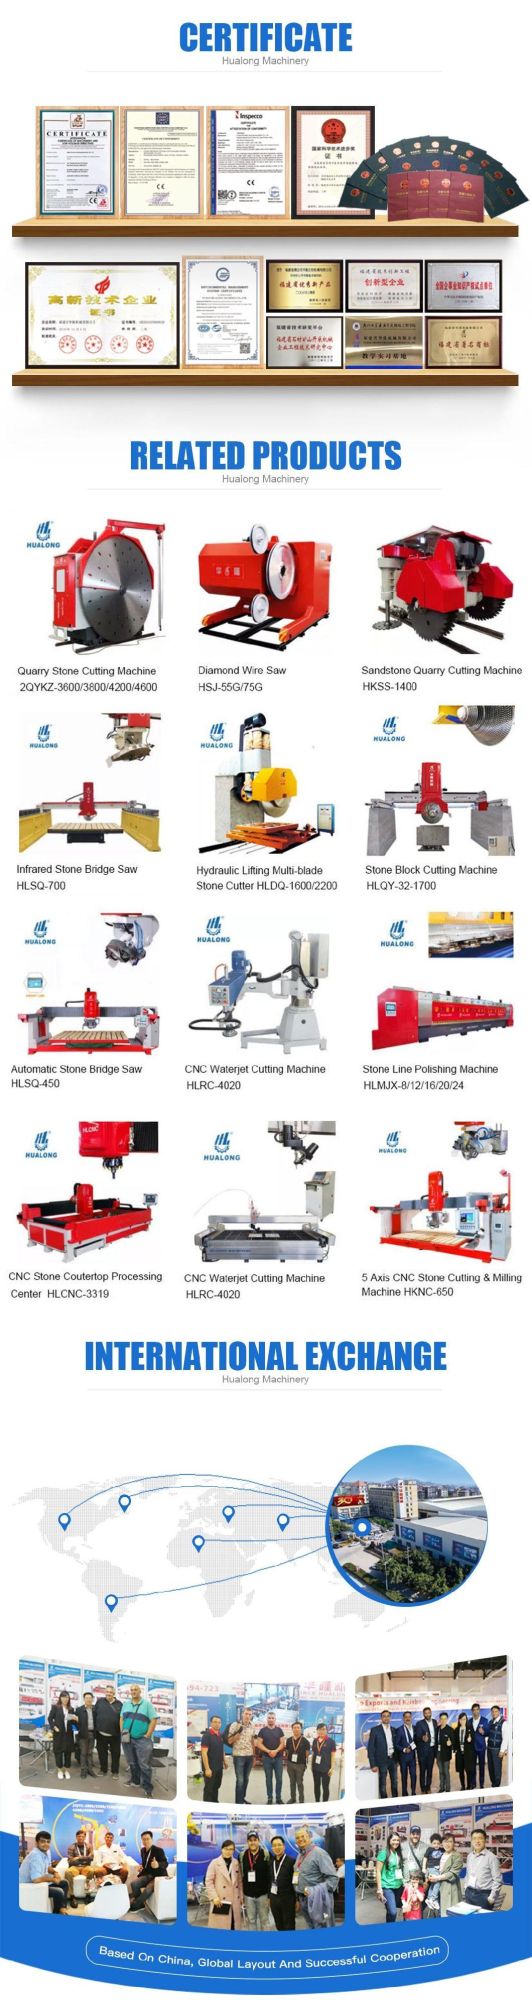 Hualong Machinery Marble Cutter Italy Software 5 Axis Monobloc CNC Bridge Saw Stone Cutting Machine for Marble Granite Quartz Porcelain Countertop in Israel